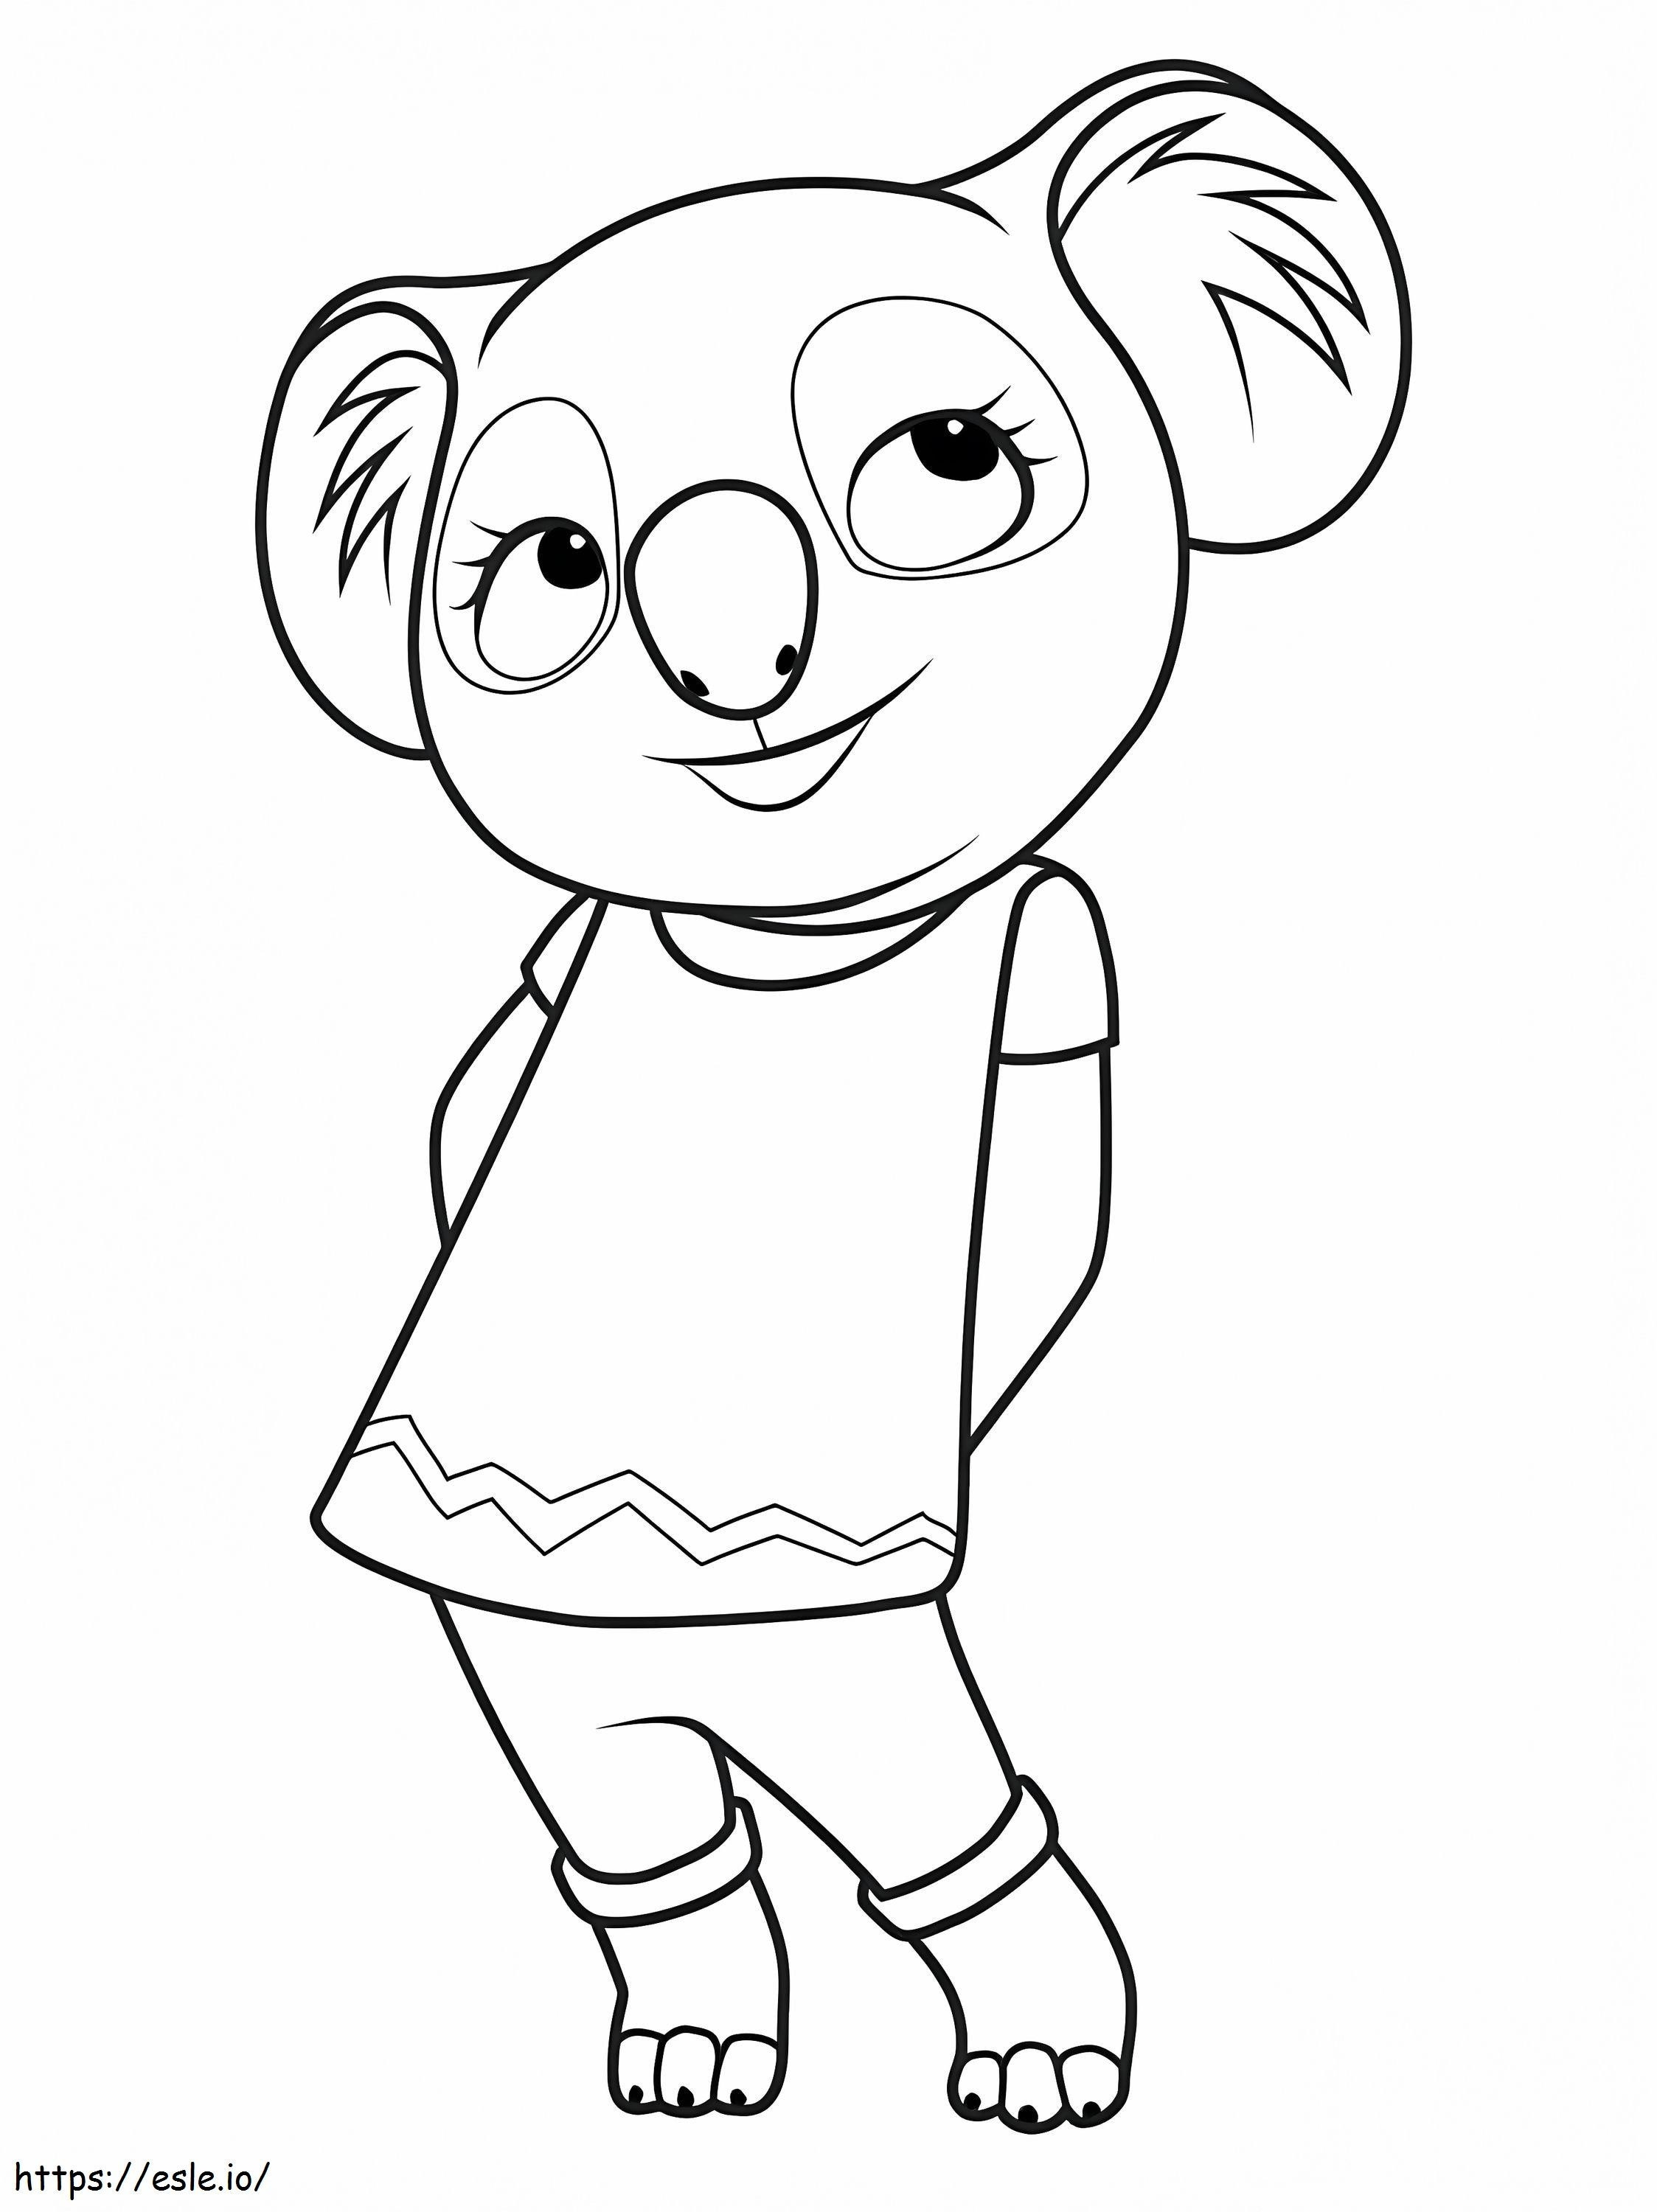 Nusty From Blinky Bill coloring page